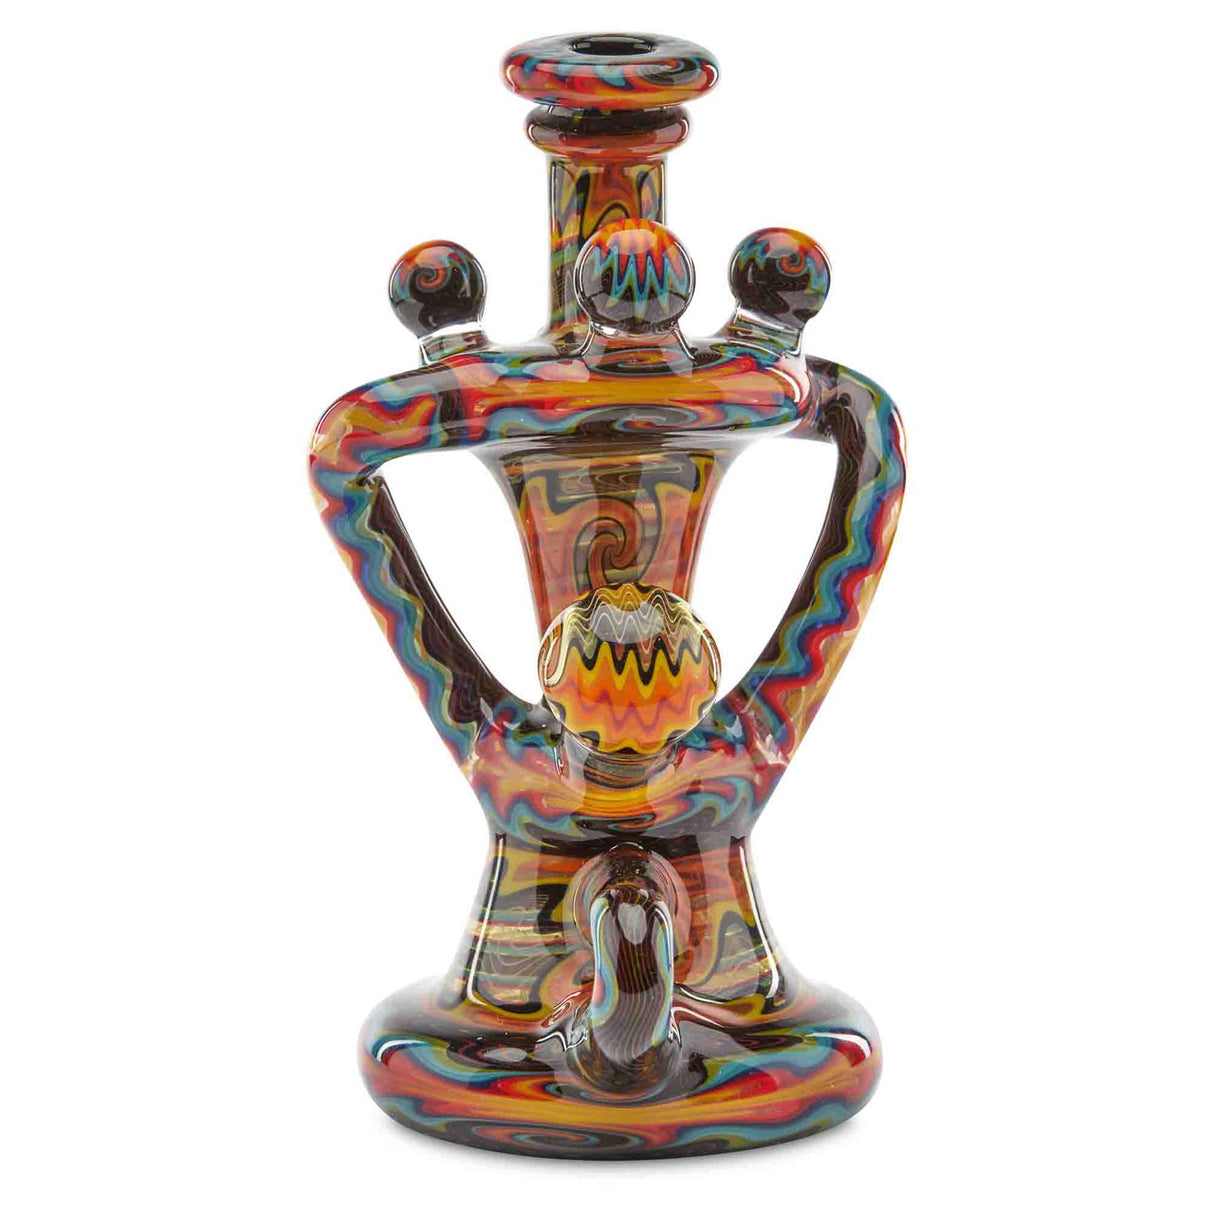 Andy G Layered Double Up Klein multi colored glass art